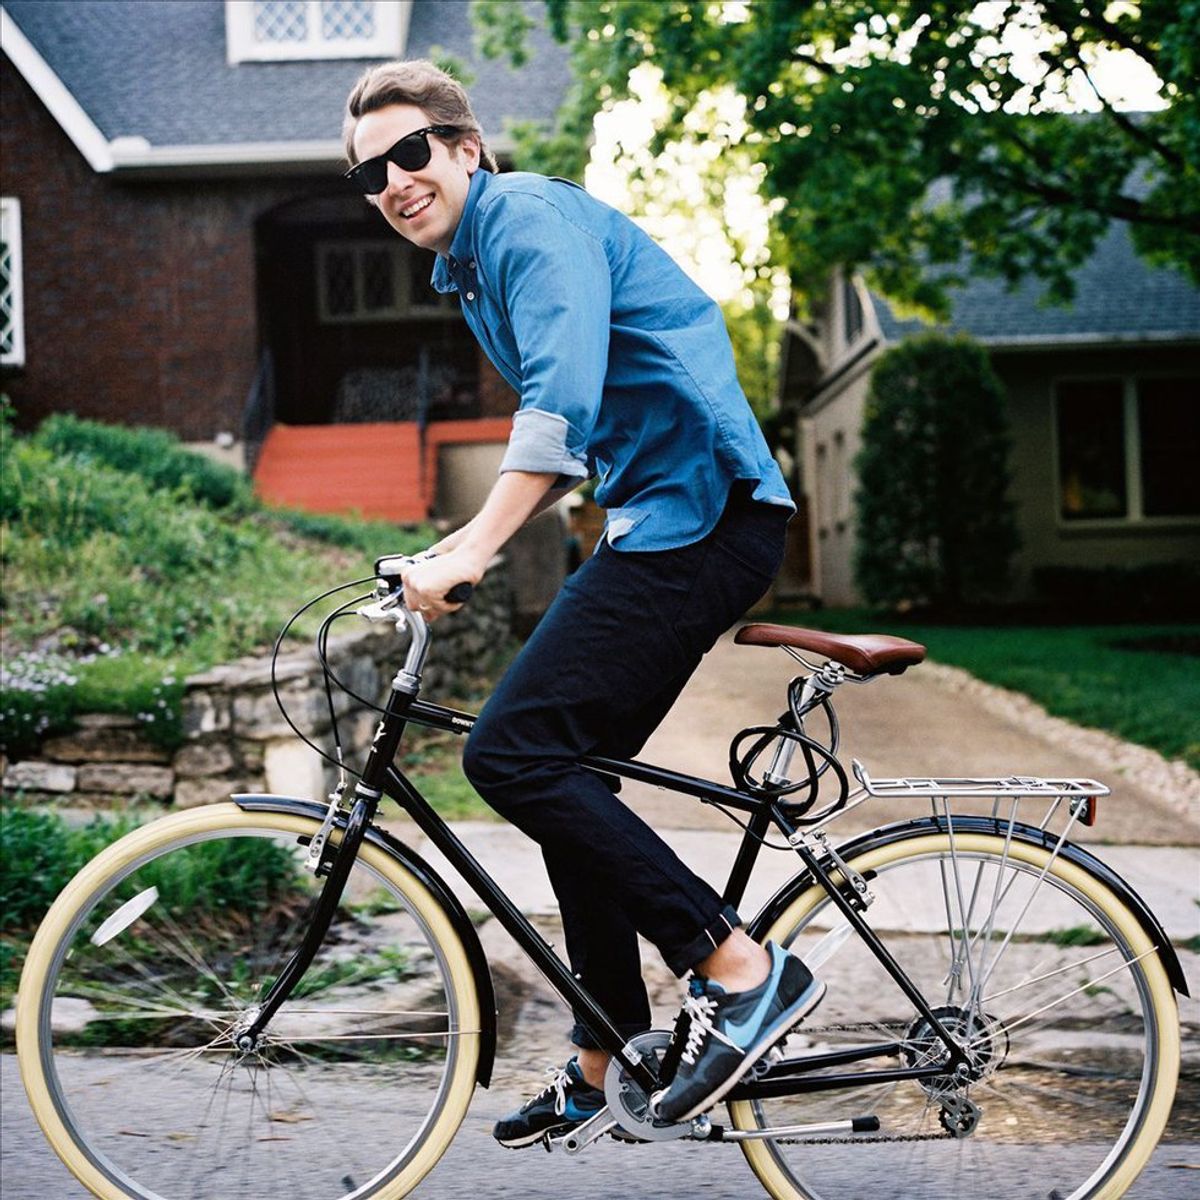 Why We All Need More Ben Rector In Our Lives